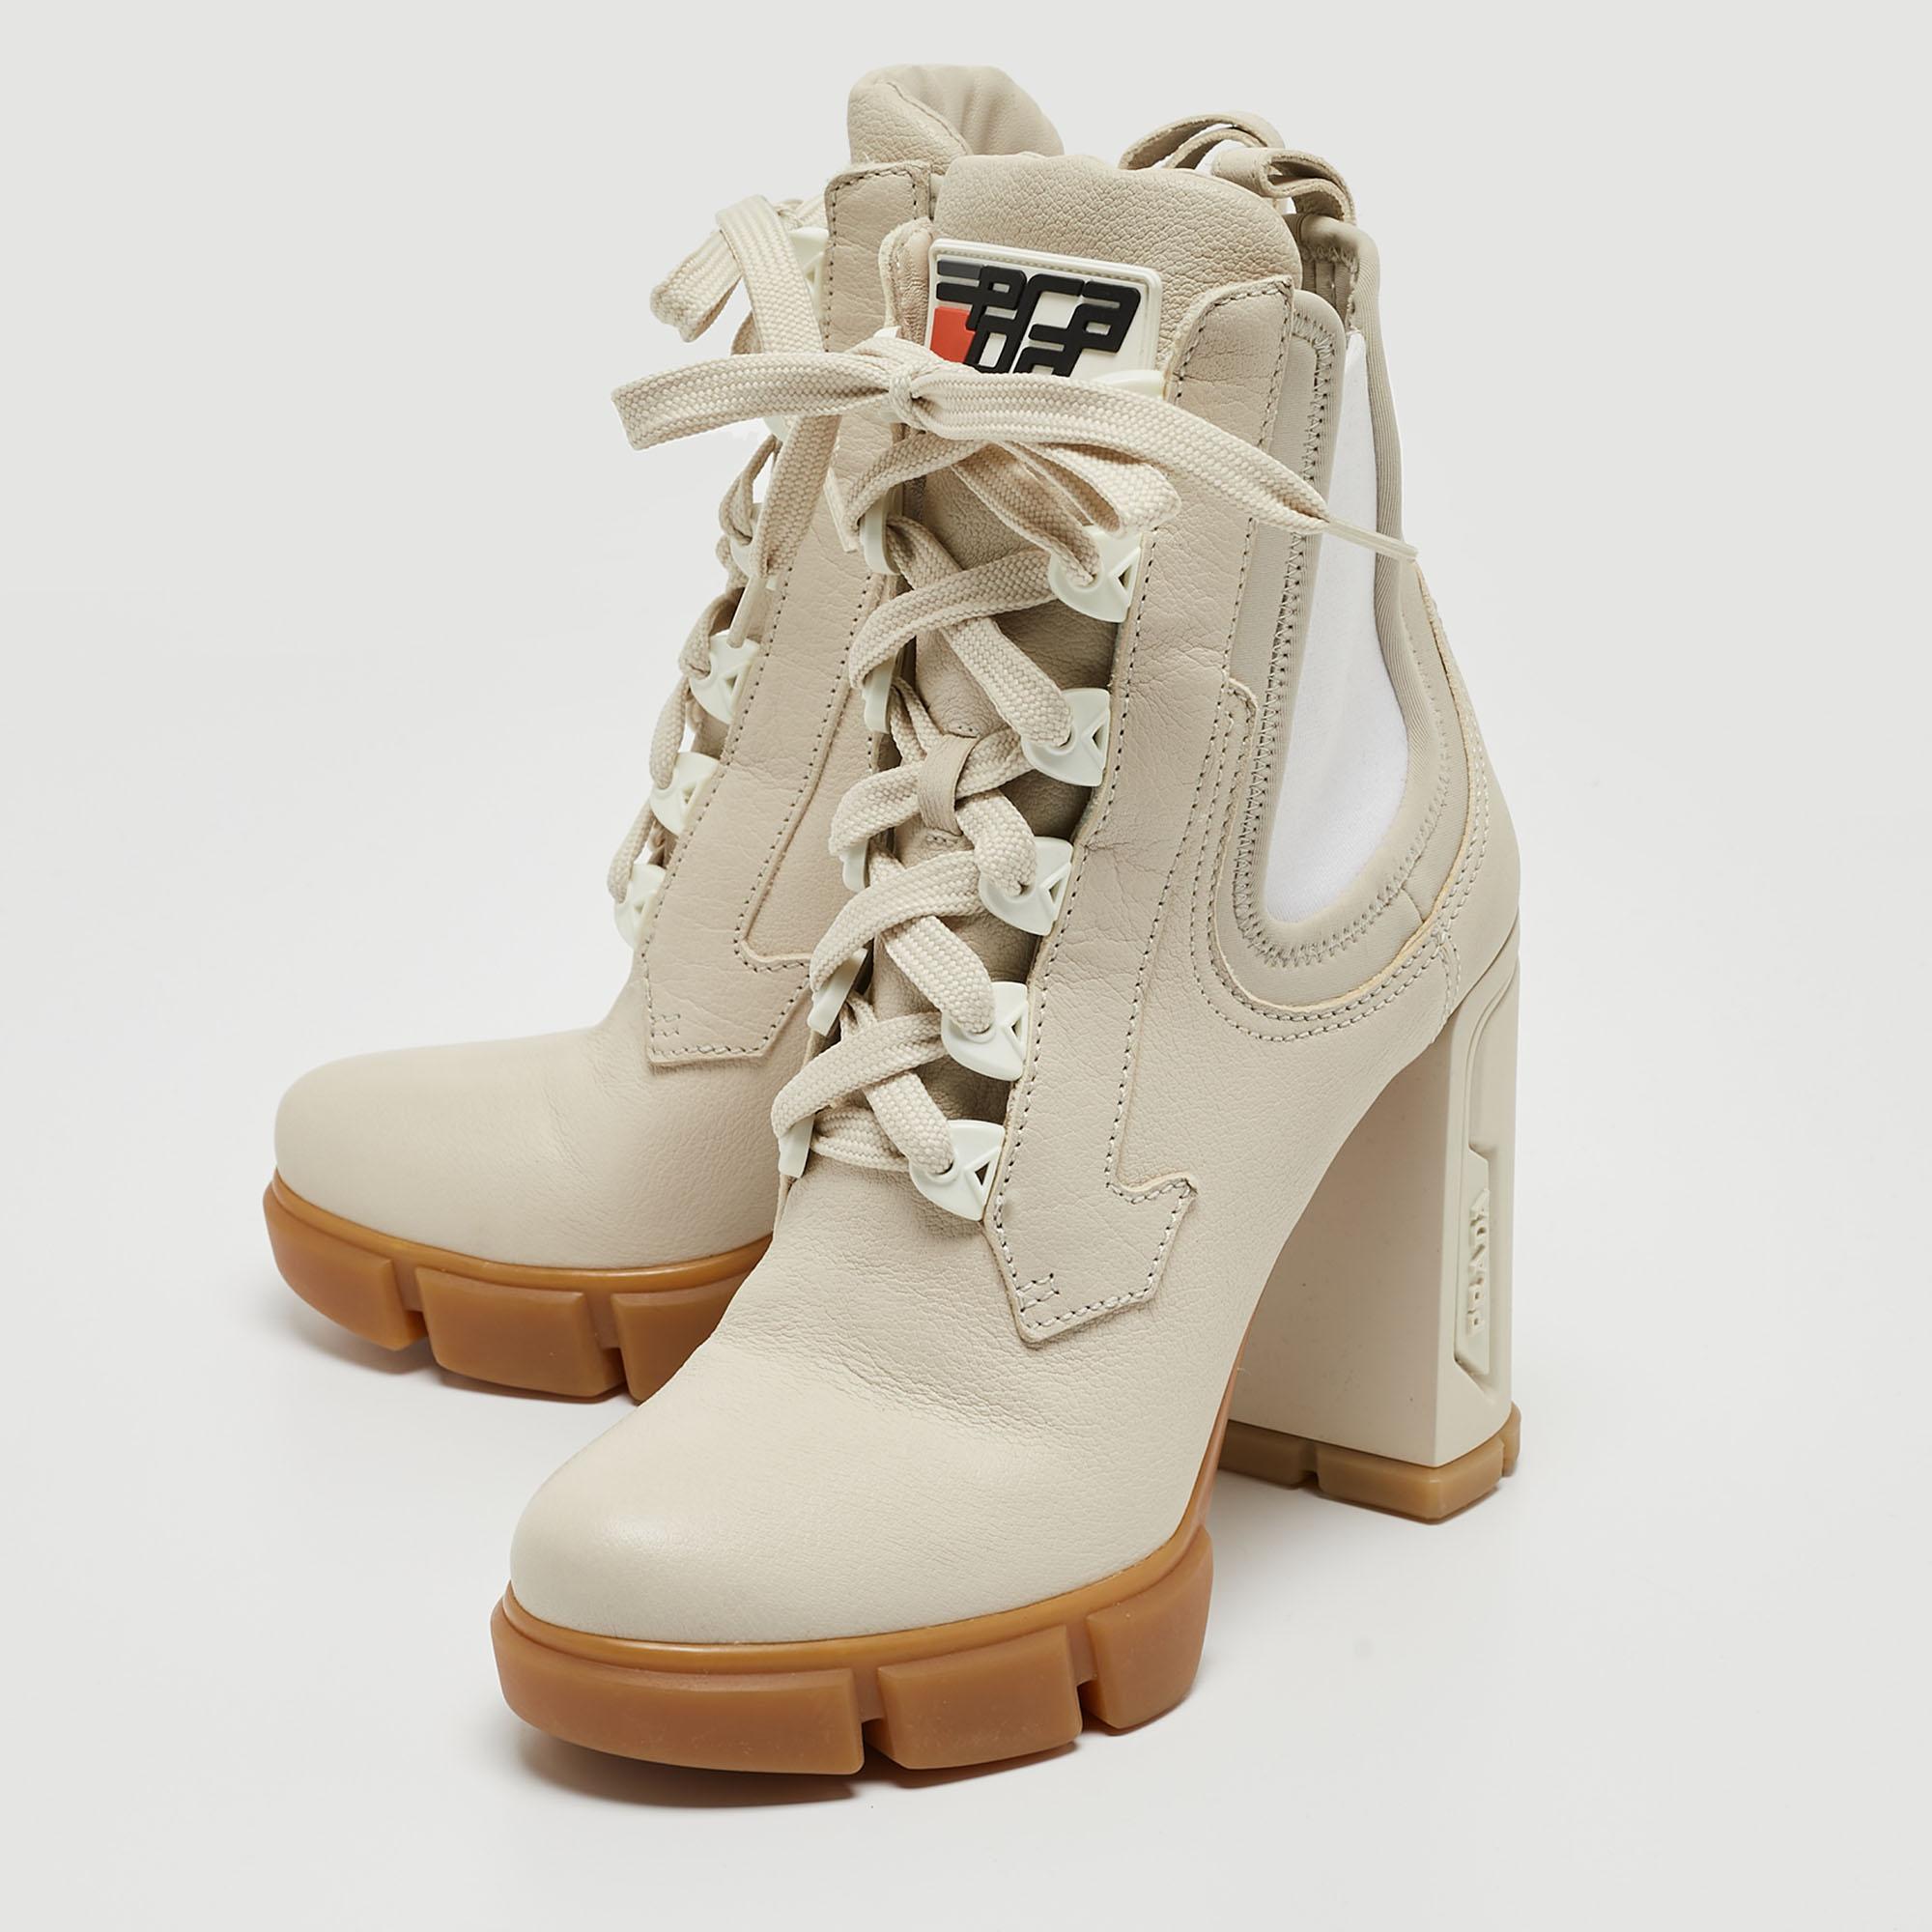 Prada Cream Neoprene and Leather Lace Up Combat Boots Size 38 3